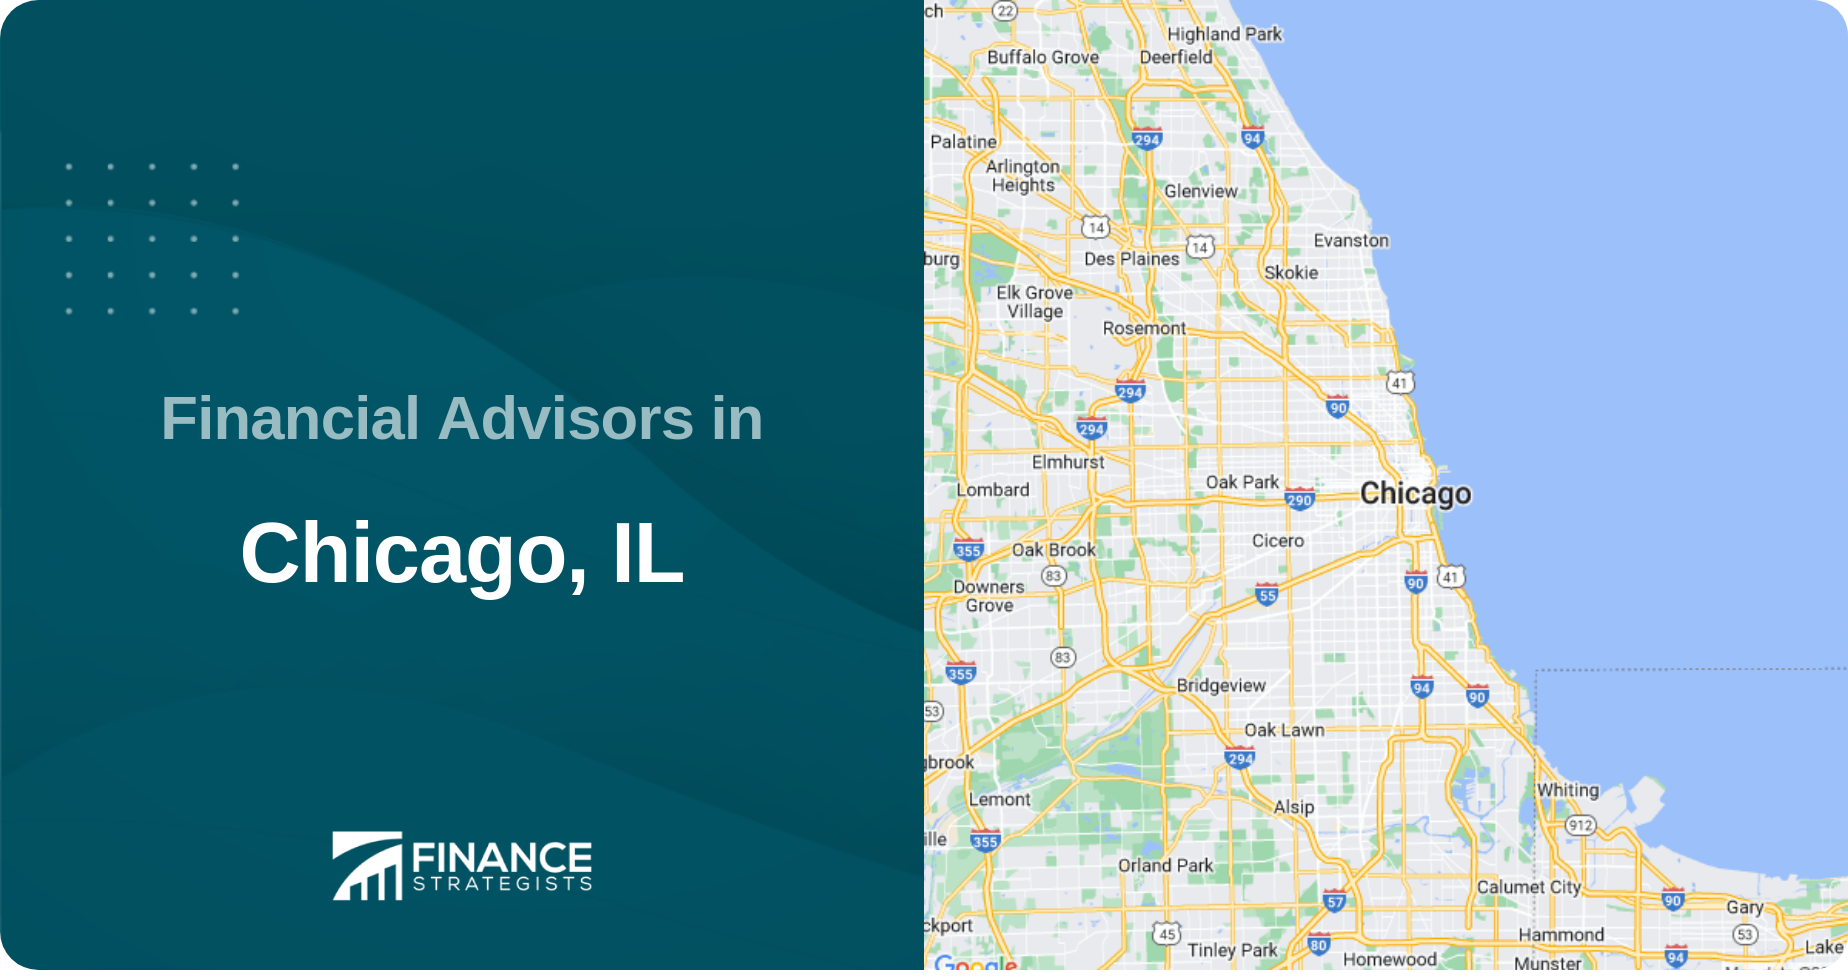 Financial Advisors in Chicago, IL